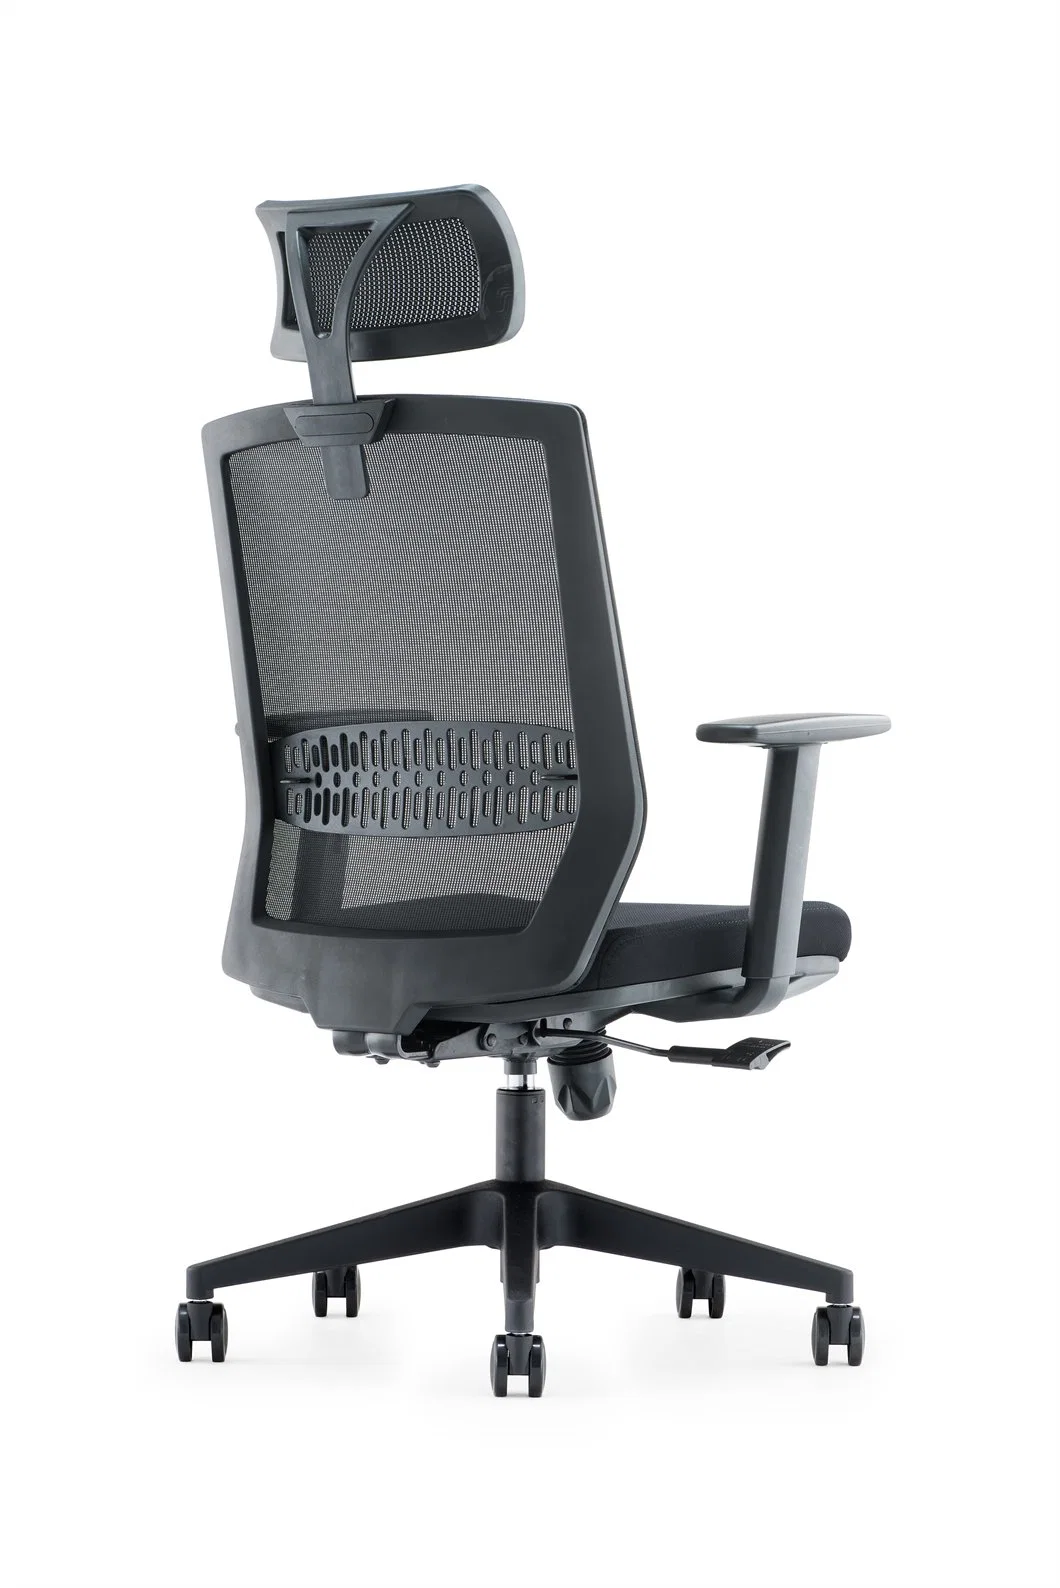 Office Chair Swivel Desk Ergonomic Mesh Computer Task Back Armrest Home Rolling Women Adults Men Chairs Height Comfortable Gaming Guest Reception